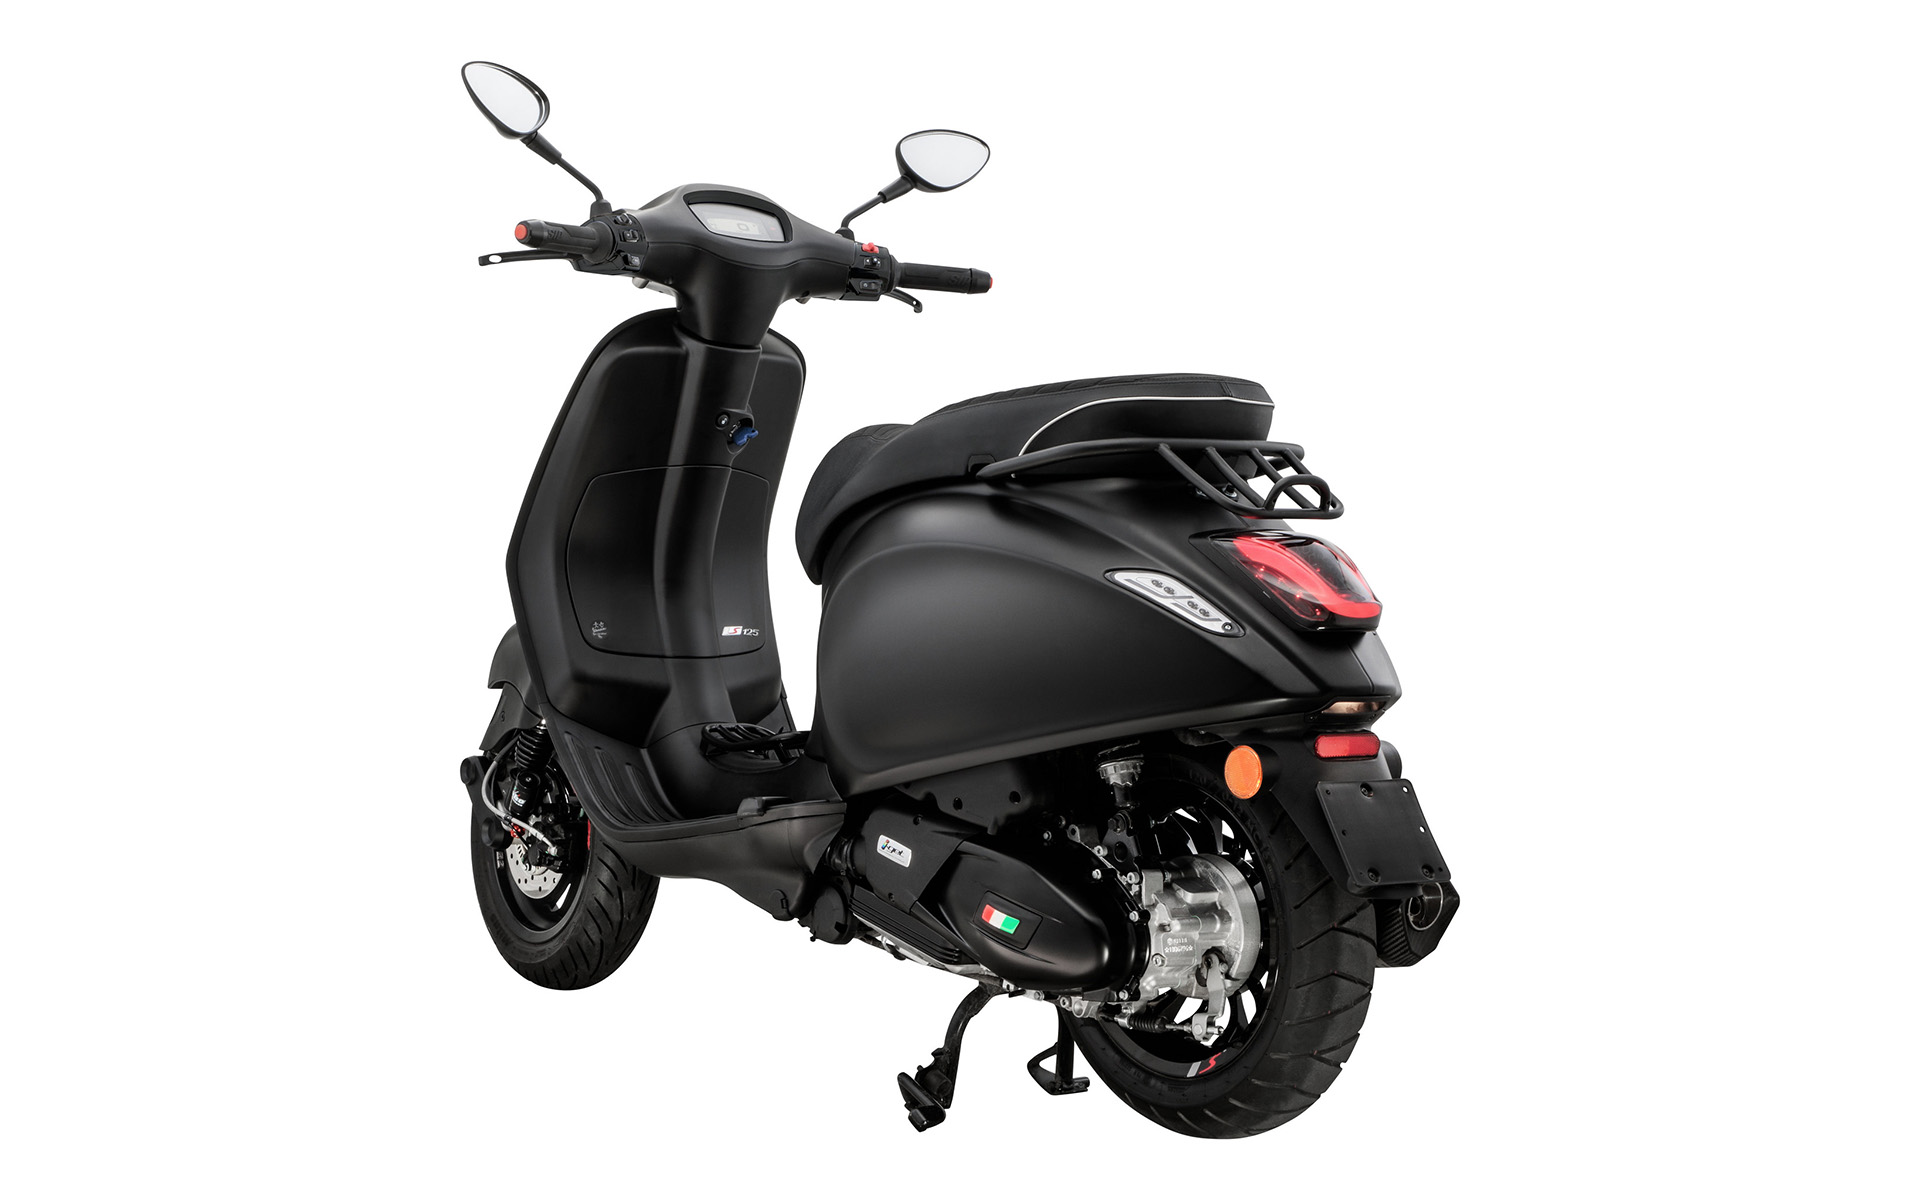 The technology of the ABS system on Vespas